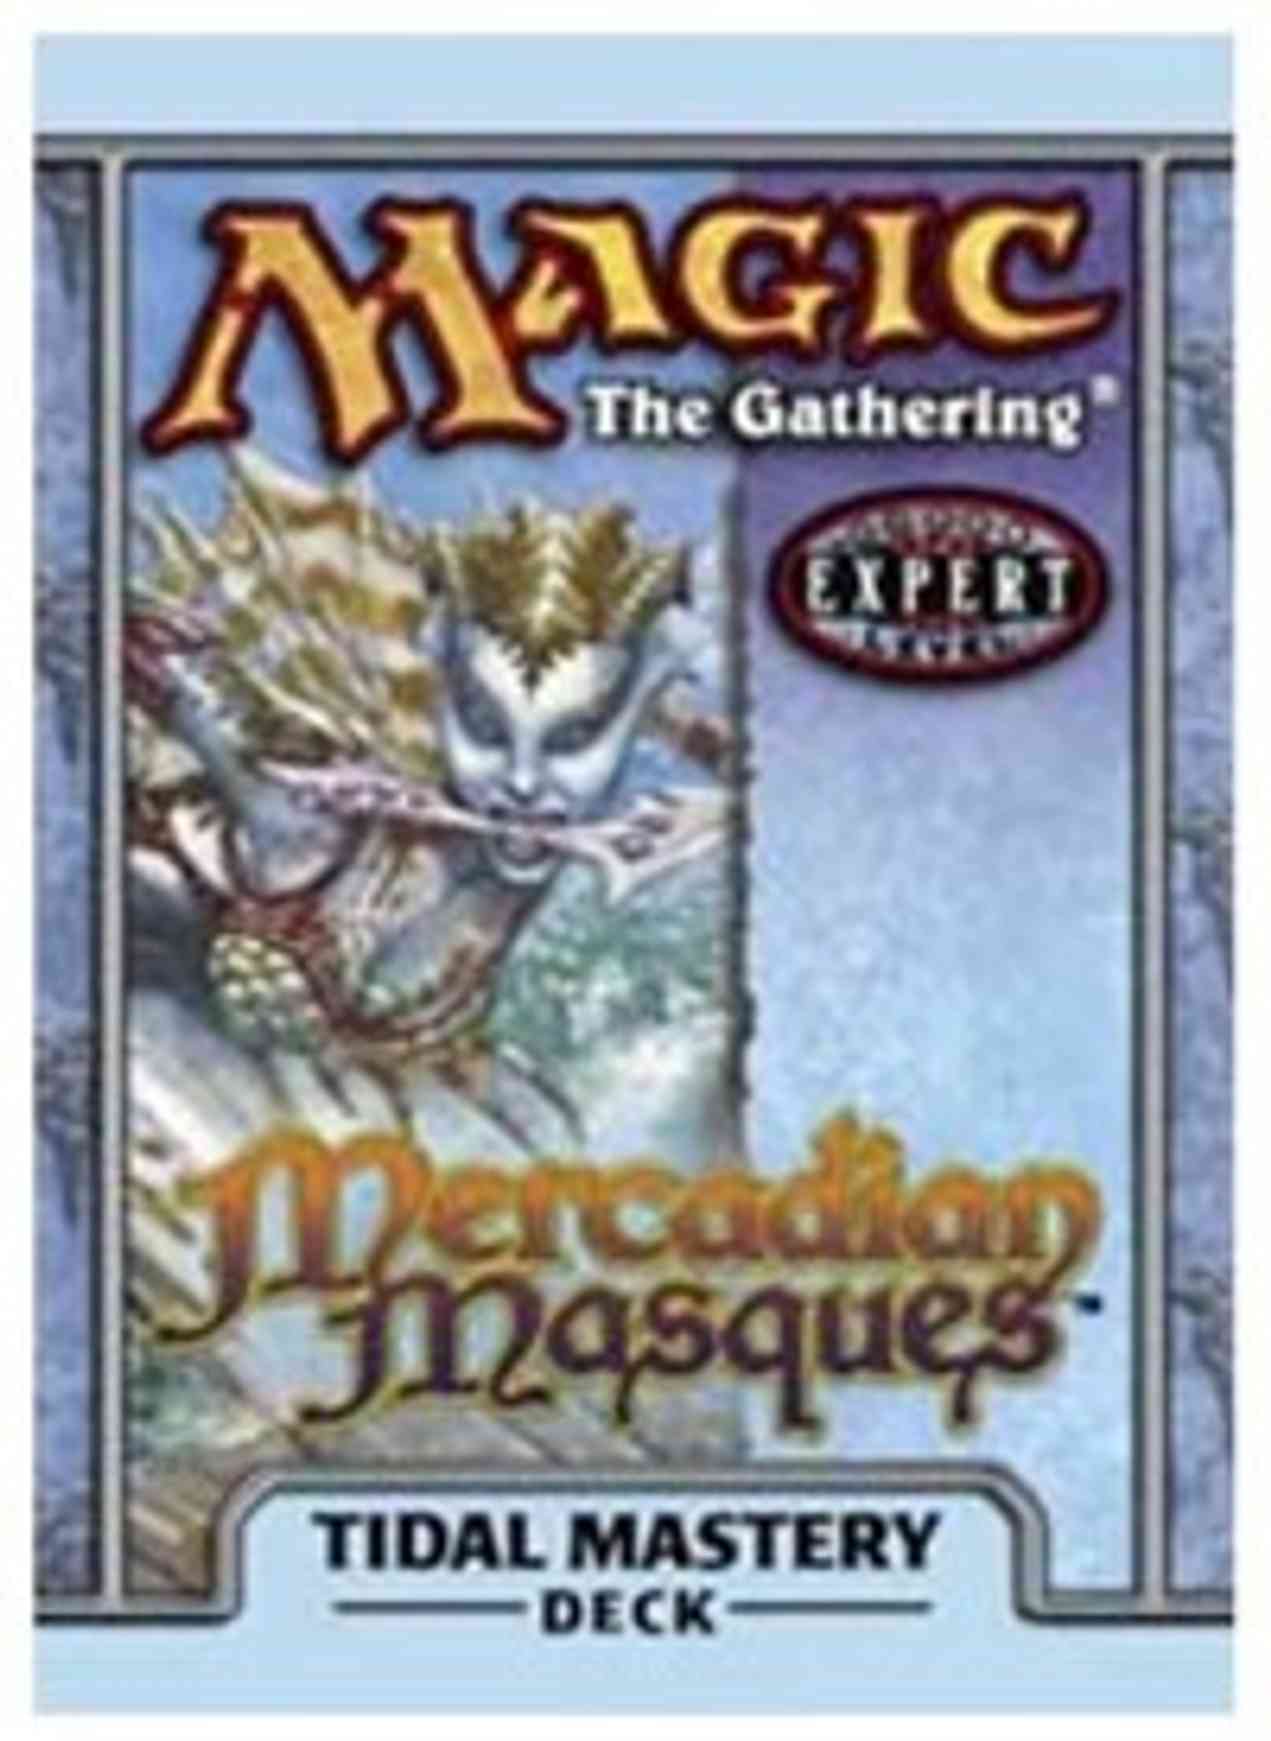 Mercadian Masques Theme Deck - Tidal Mastery magic card front